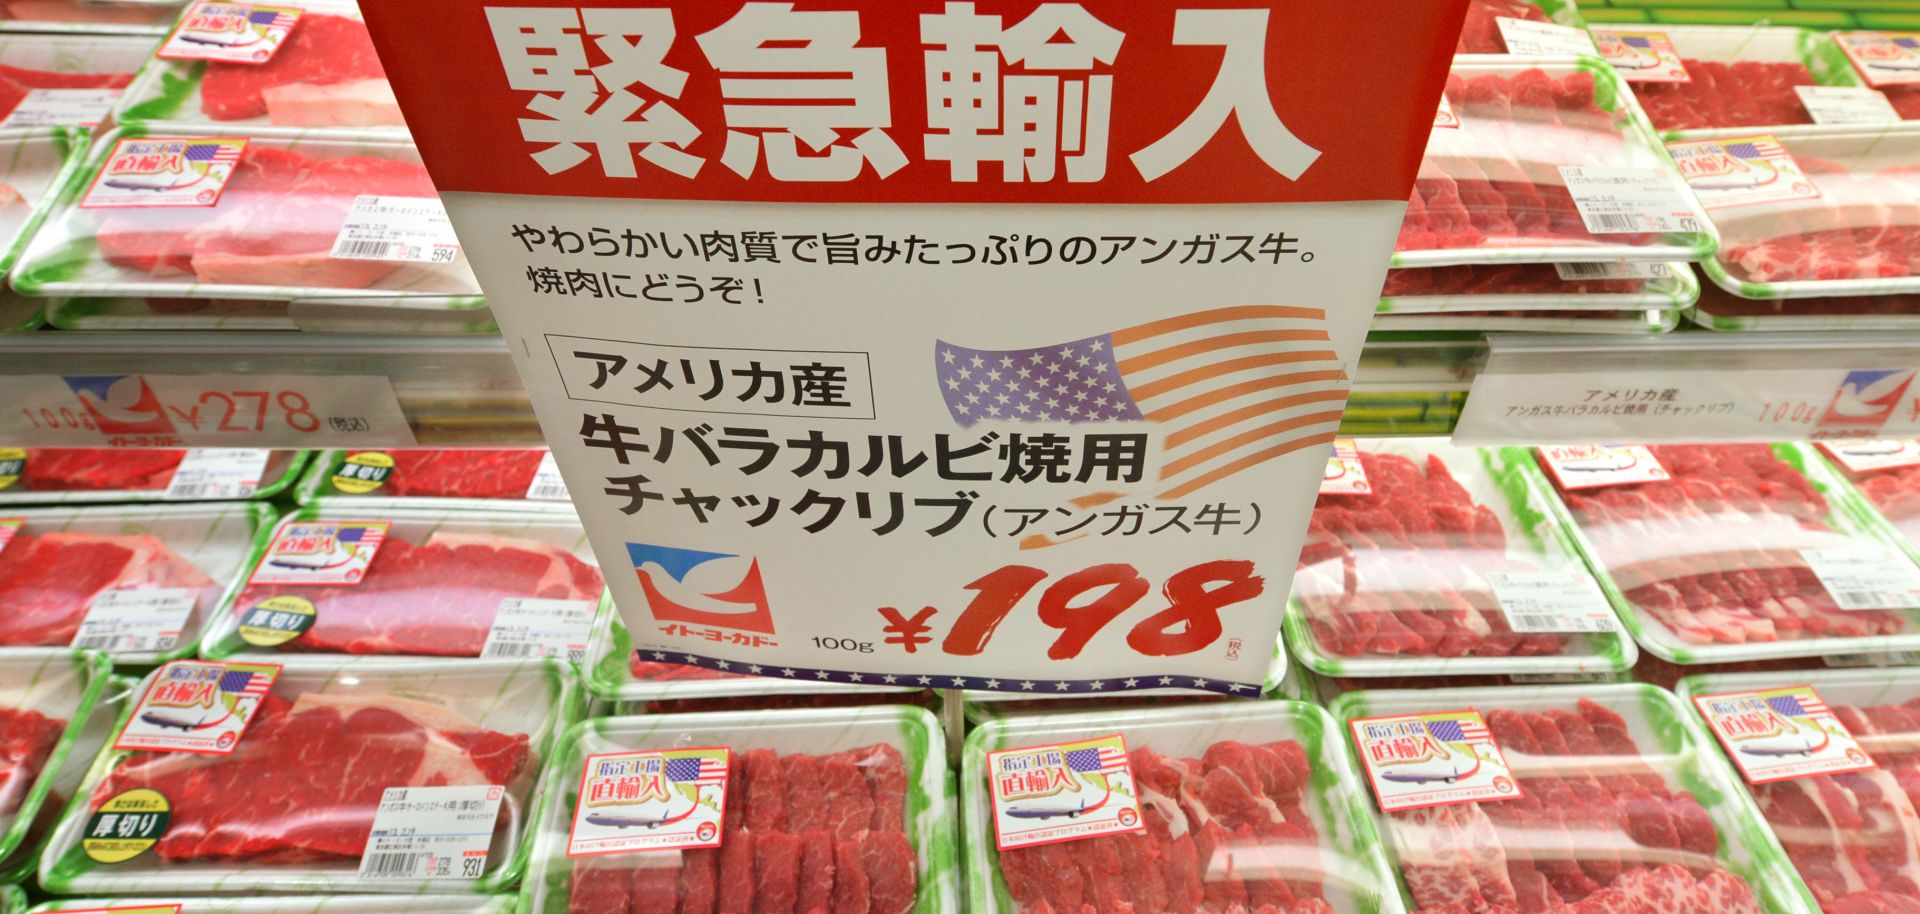 A Tokyo supermarket sells beef imported from the United States in this February 2013 file photo.